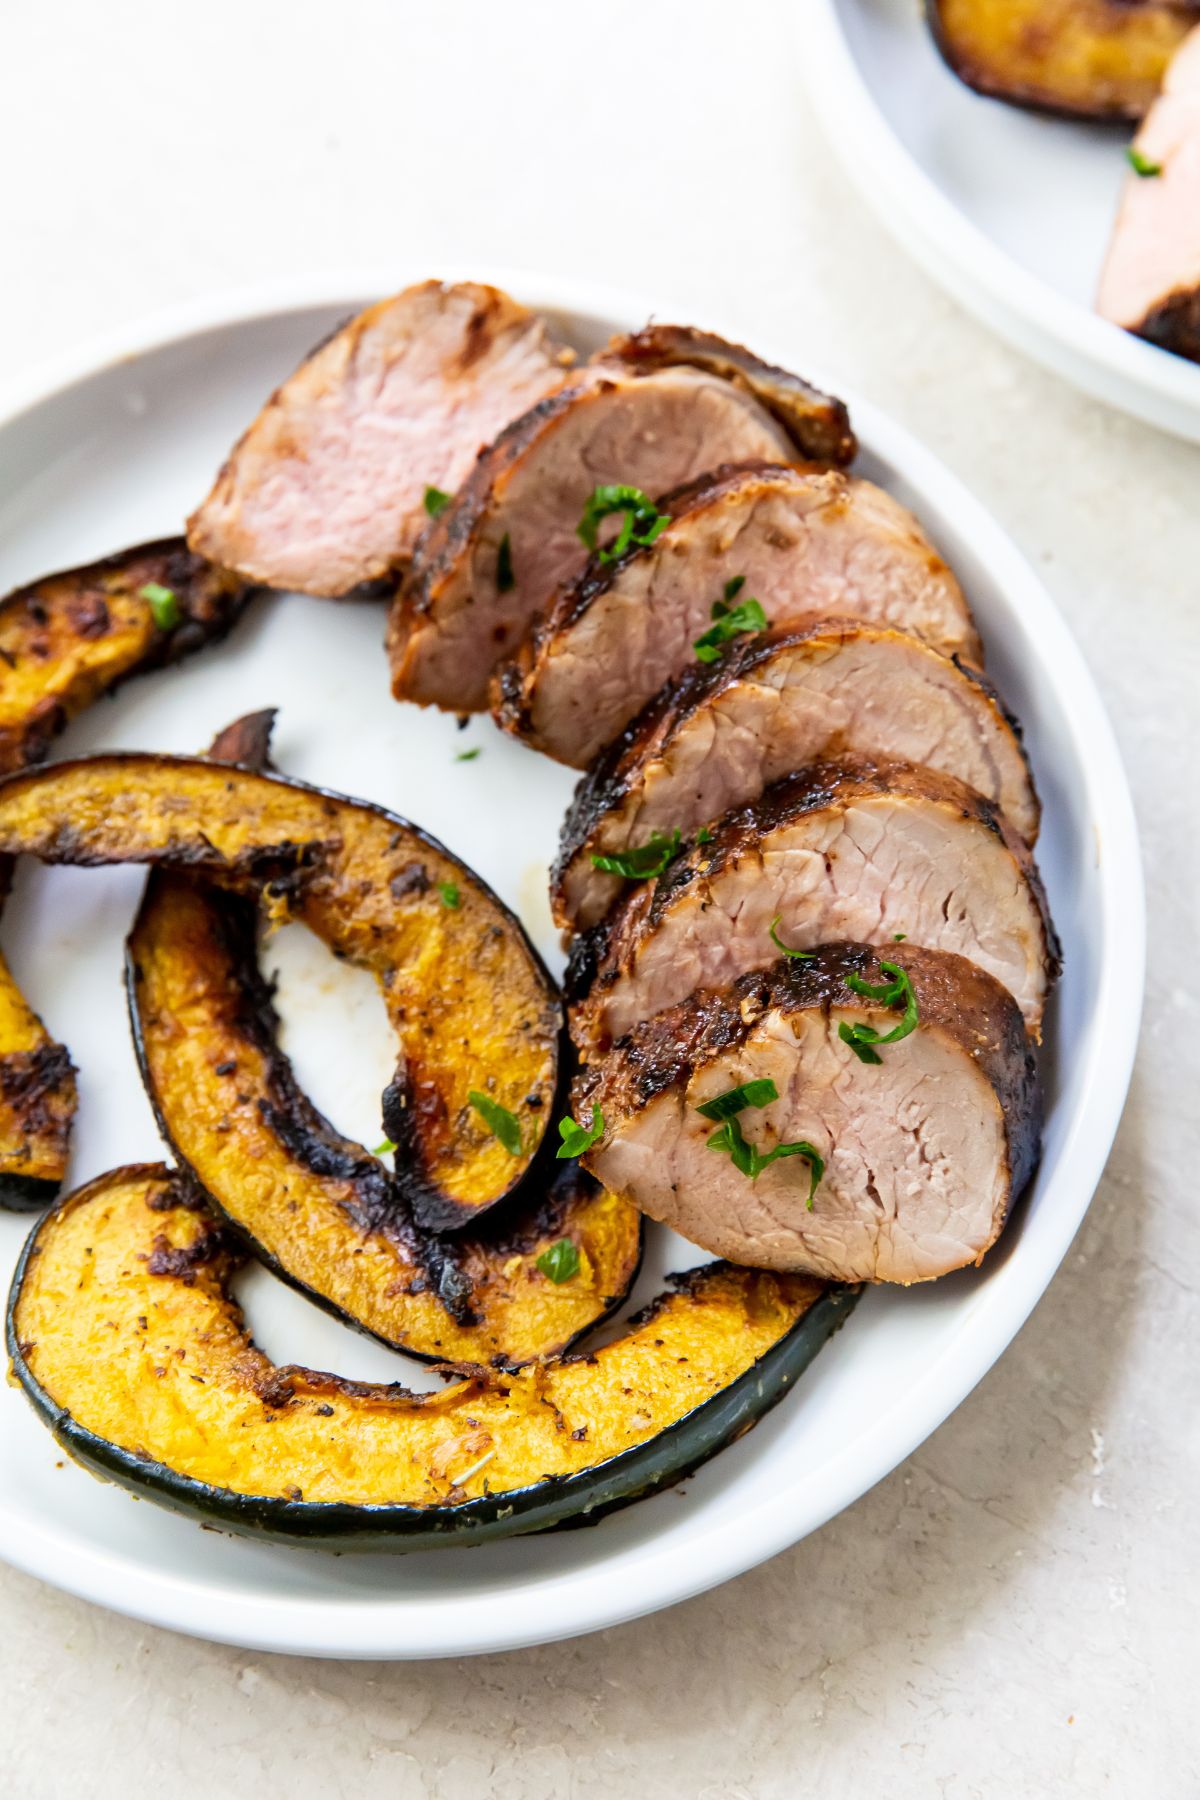 white plate with pork tenderloin and acorn squash next to it